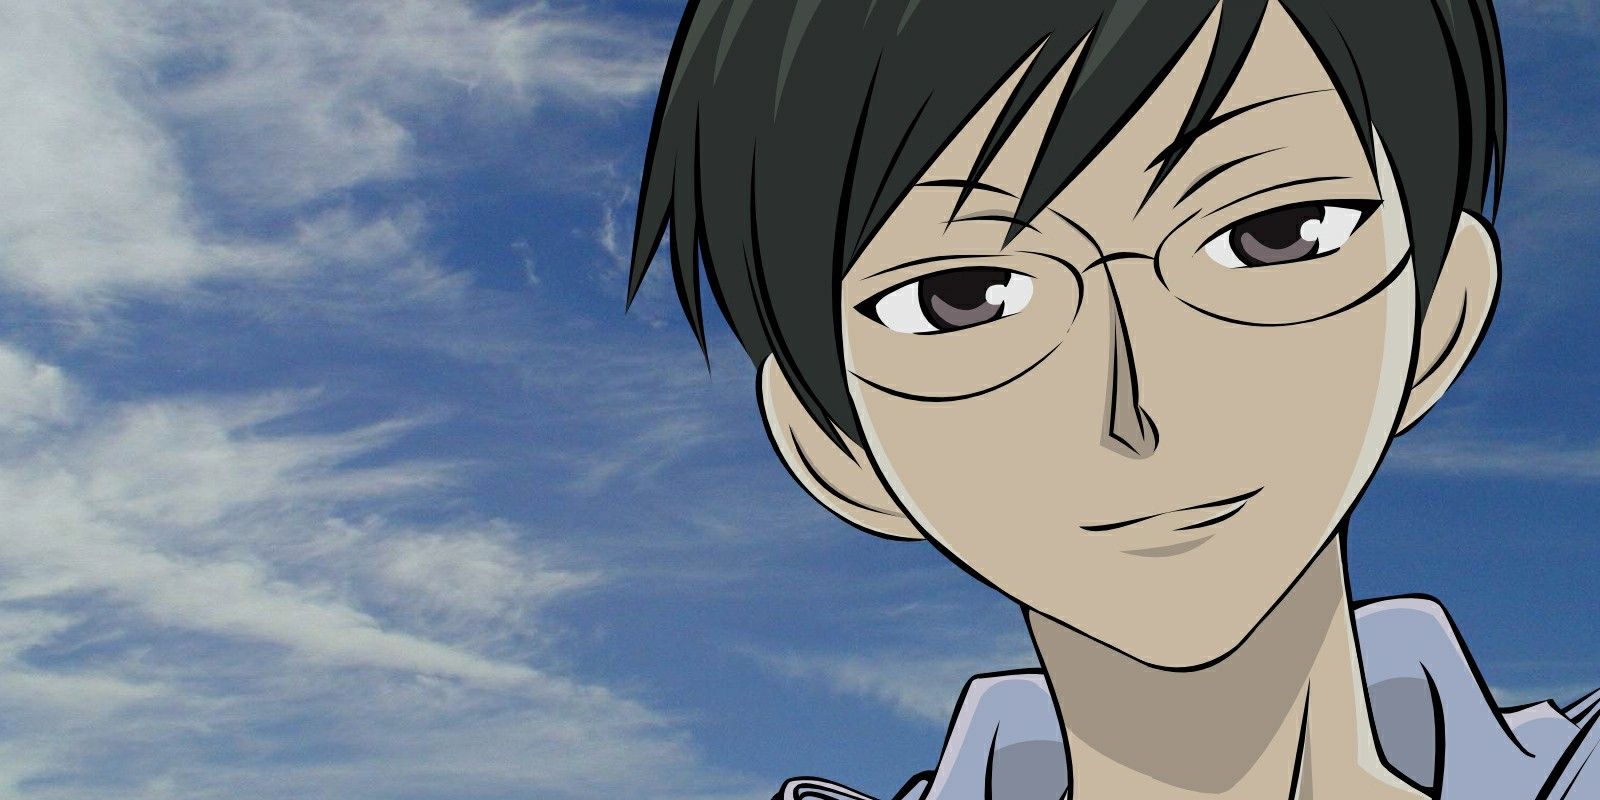 Kyoya from Ouran High School Host Club smiling in front of cloudy blue sky